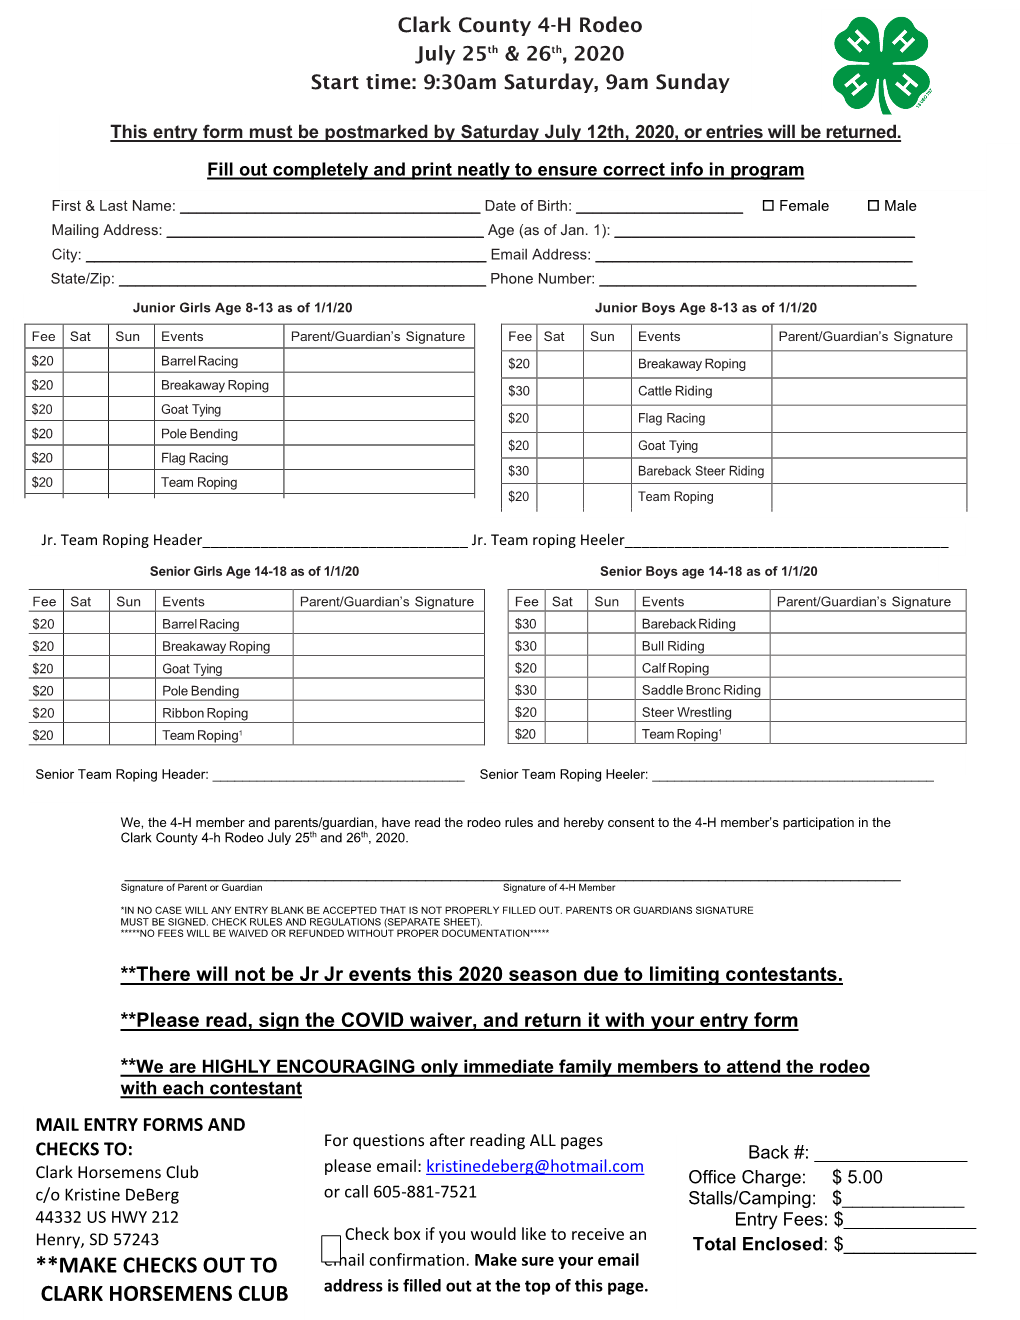 2020 Clark 4-H Rodeo Entry Form